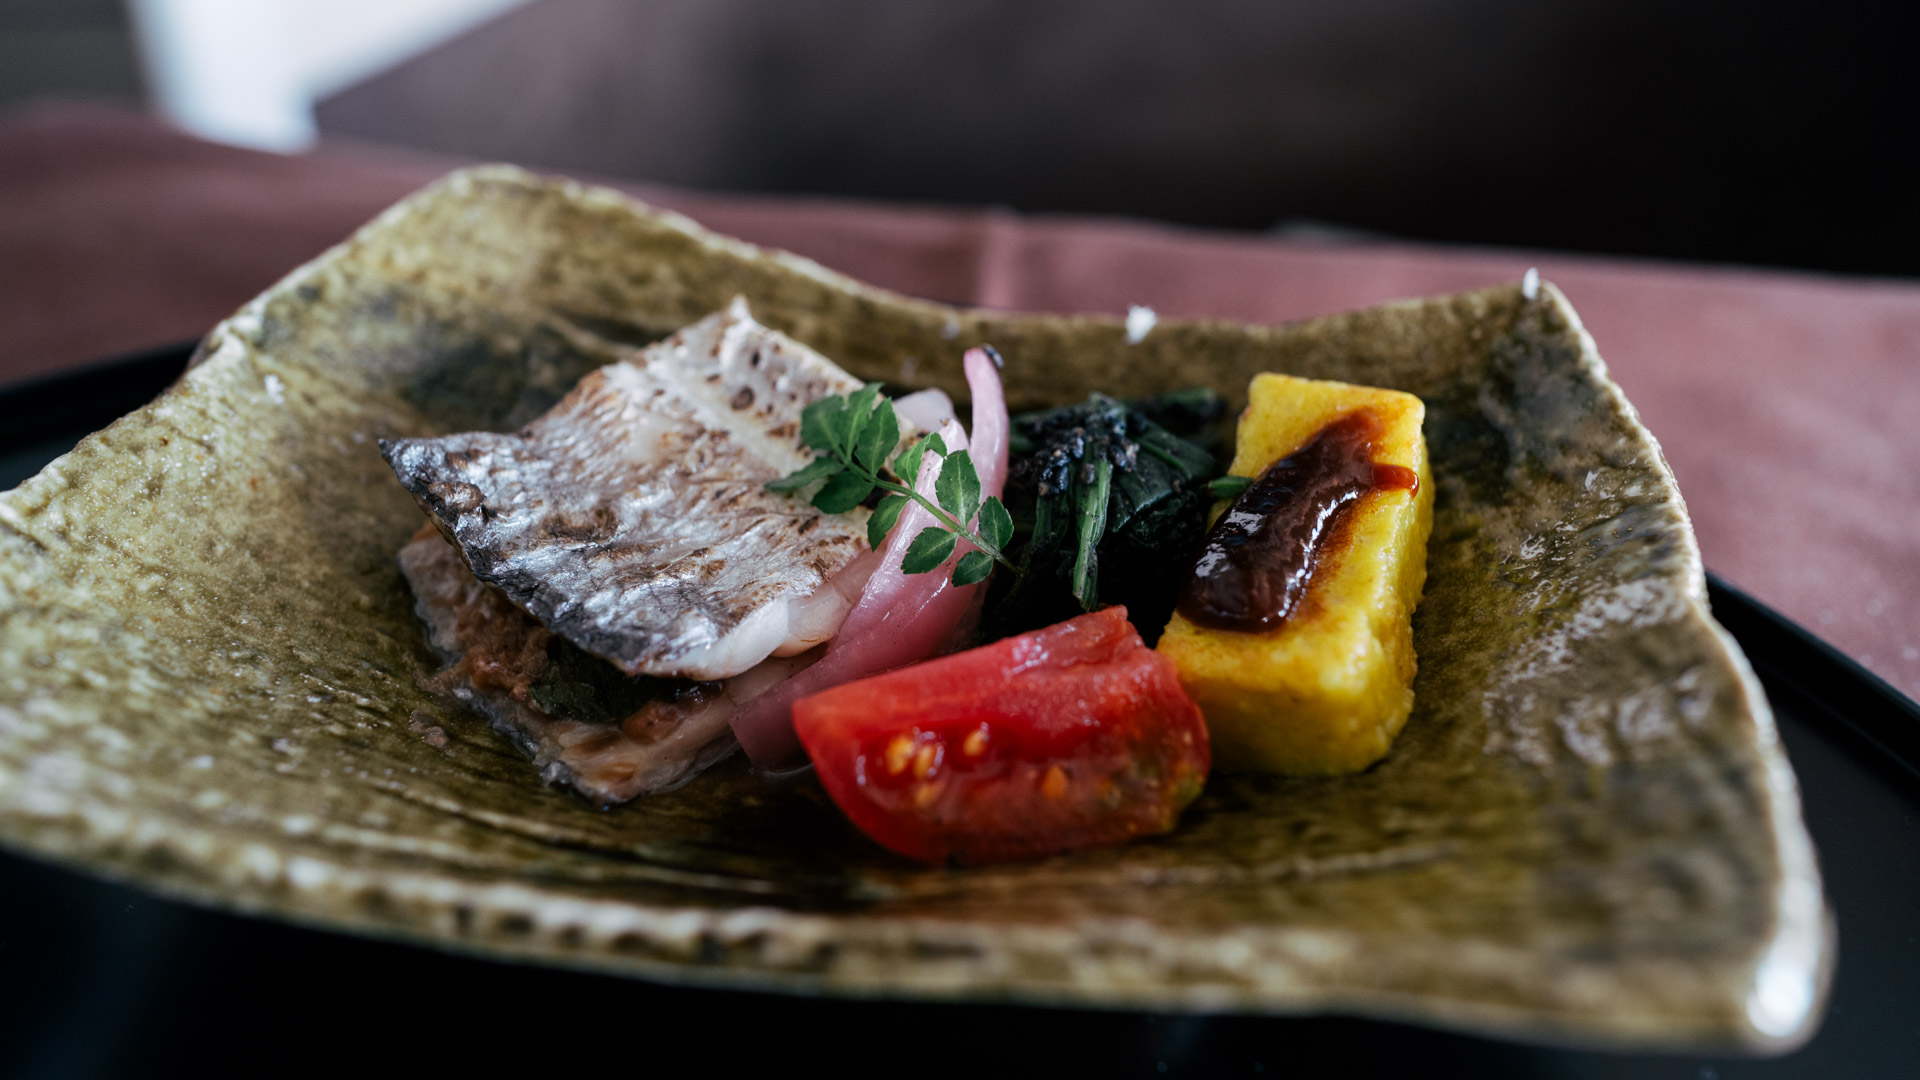 Japan Airlines Boeing 777 First Class grilled fish